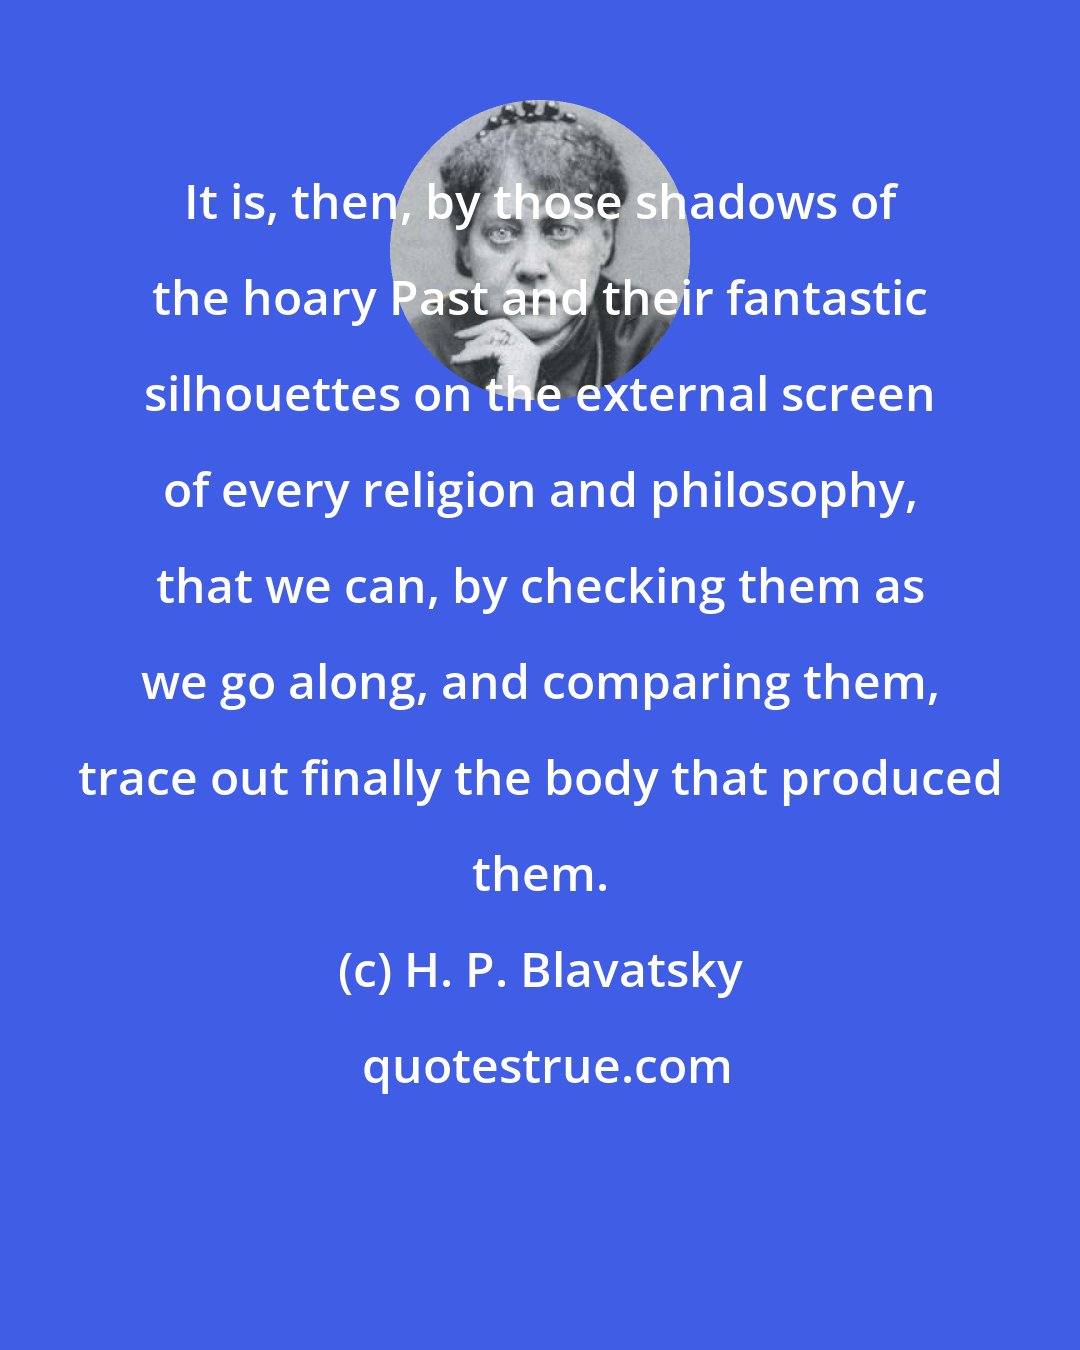 H. P. Blavatsky: It is, then, by those shadows of the hoary Past and their fantastic silhouettes on the external screen of every religion and philosophy, that we can, by checking them as we go along, and comparing them, trace out finally the body that produced them.